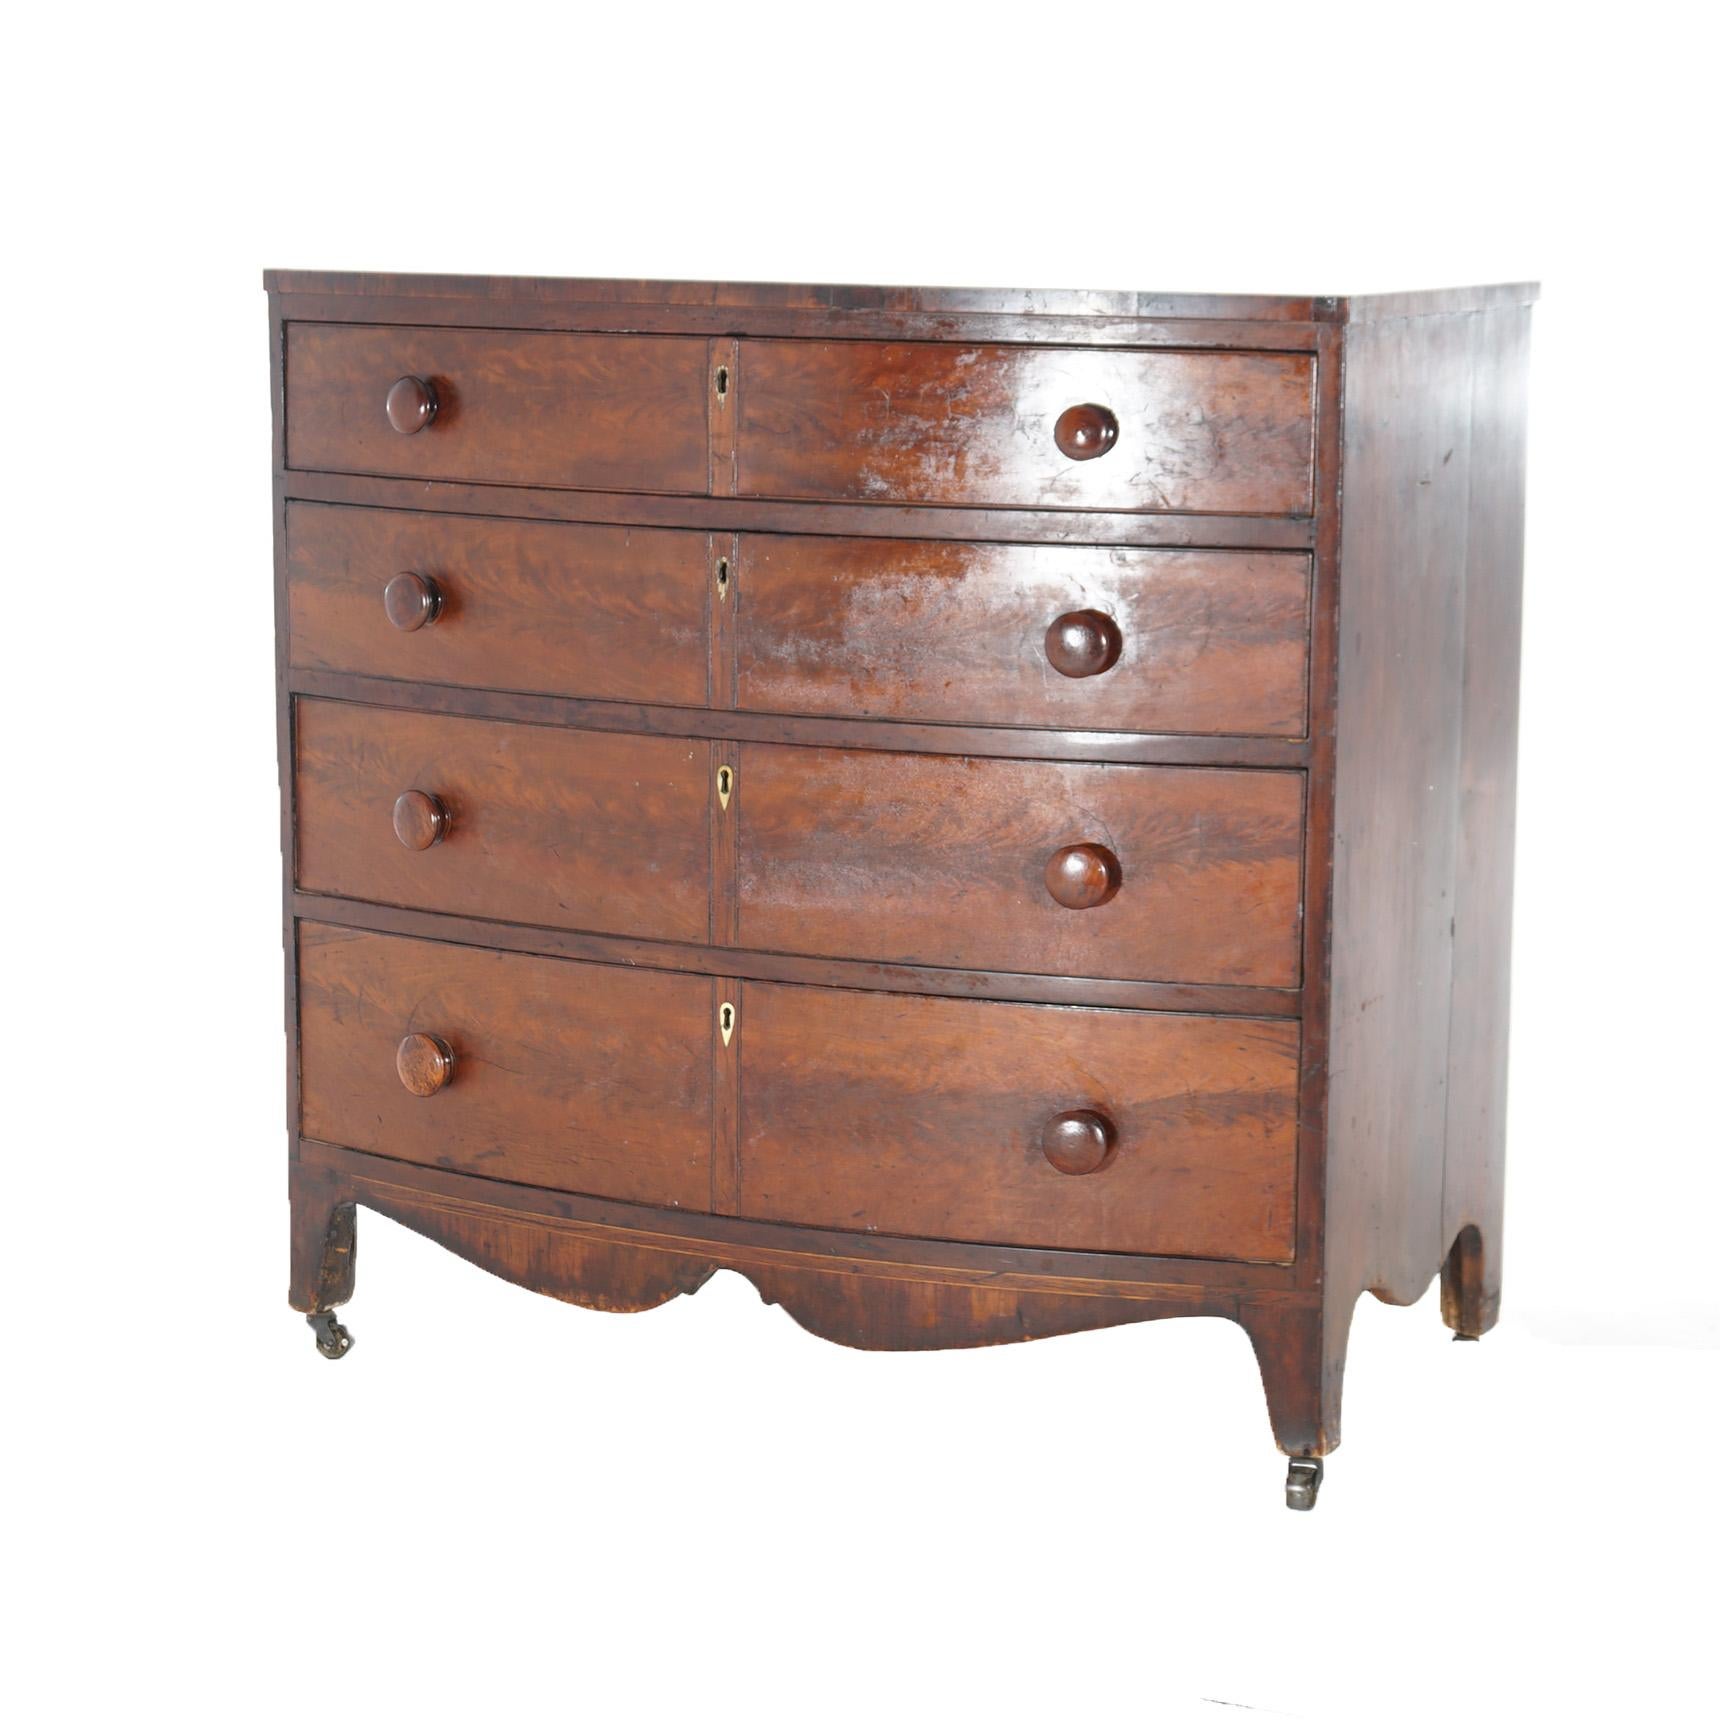 English Antique Hepplewhite Flame Mahogany Bow Front Chest of Drawers c1830